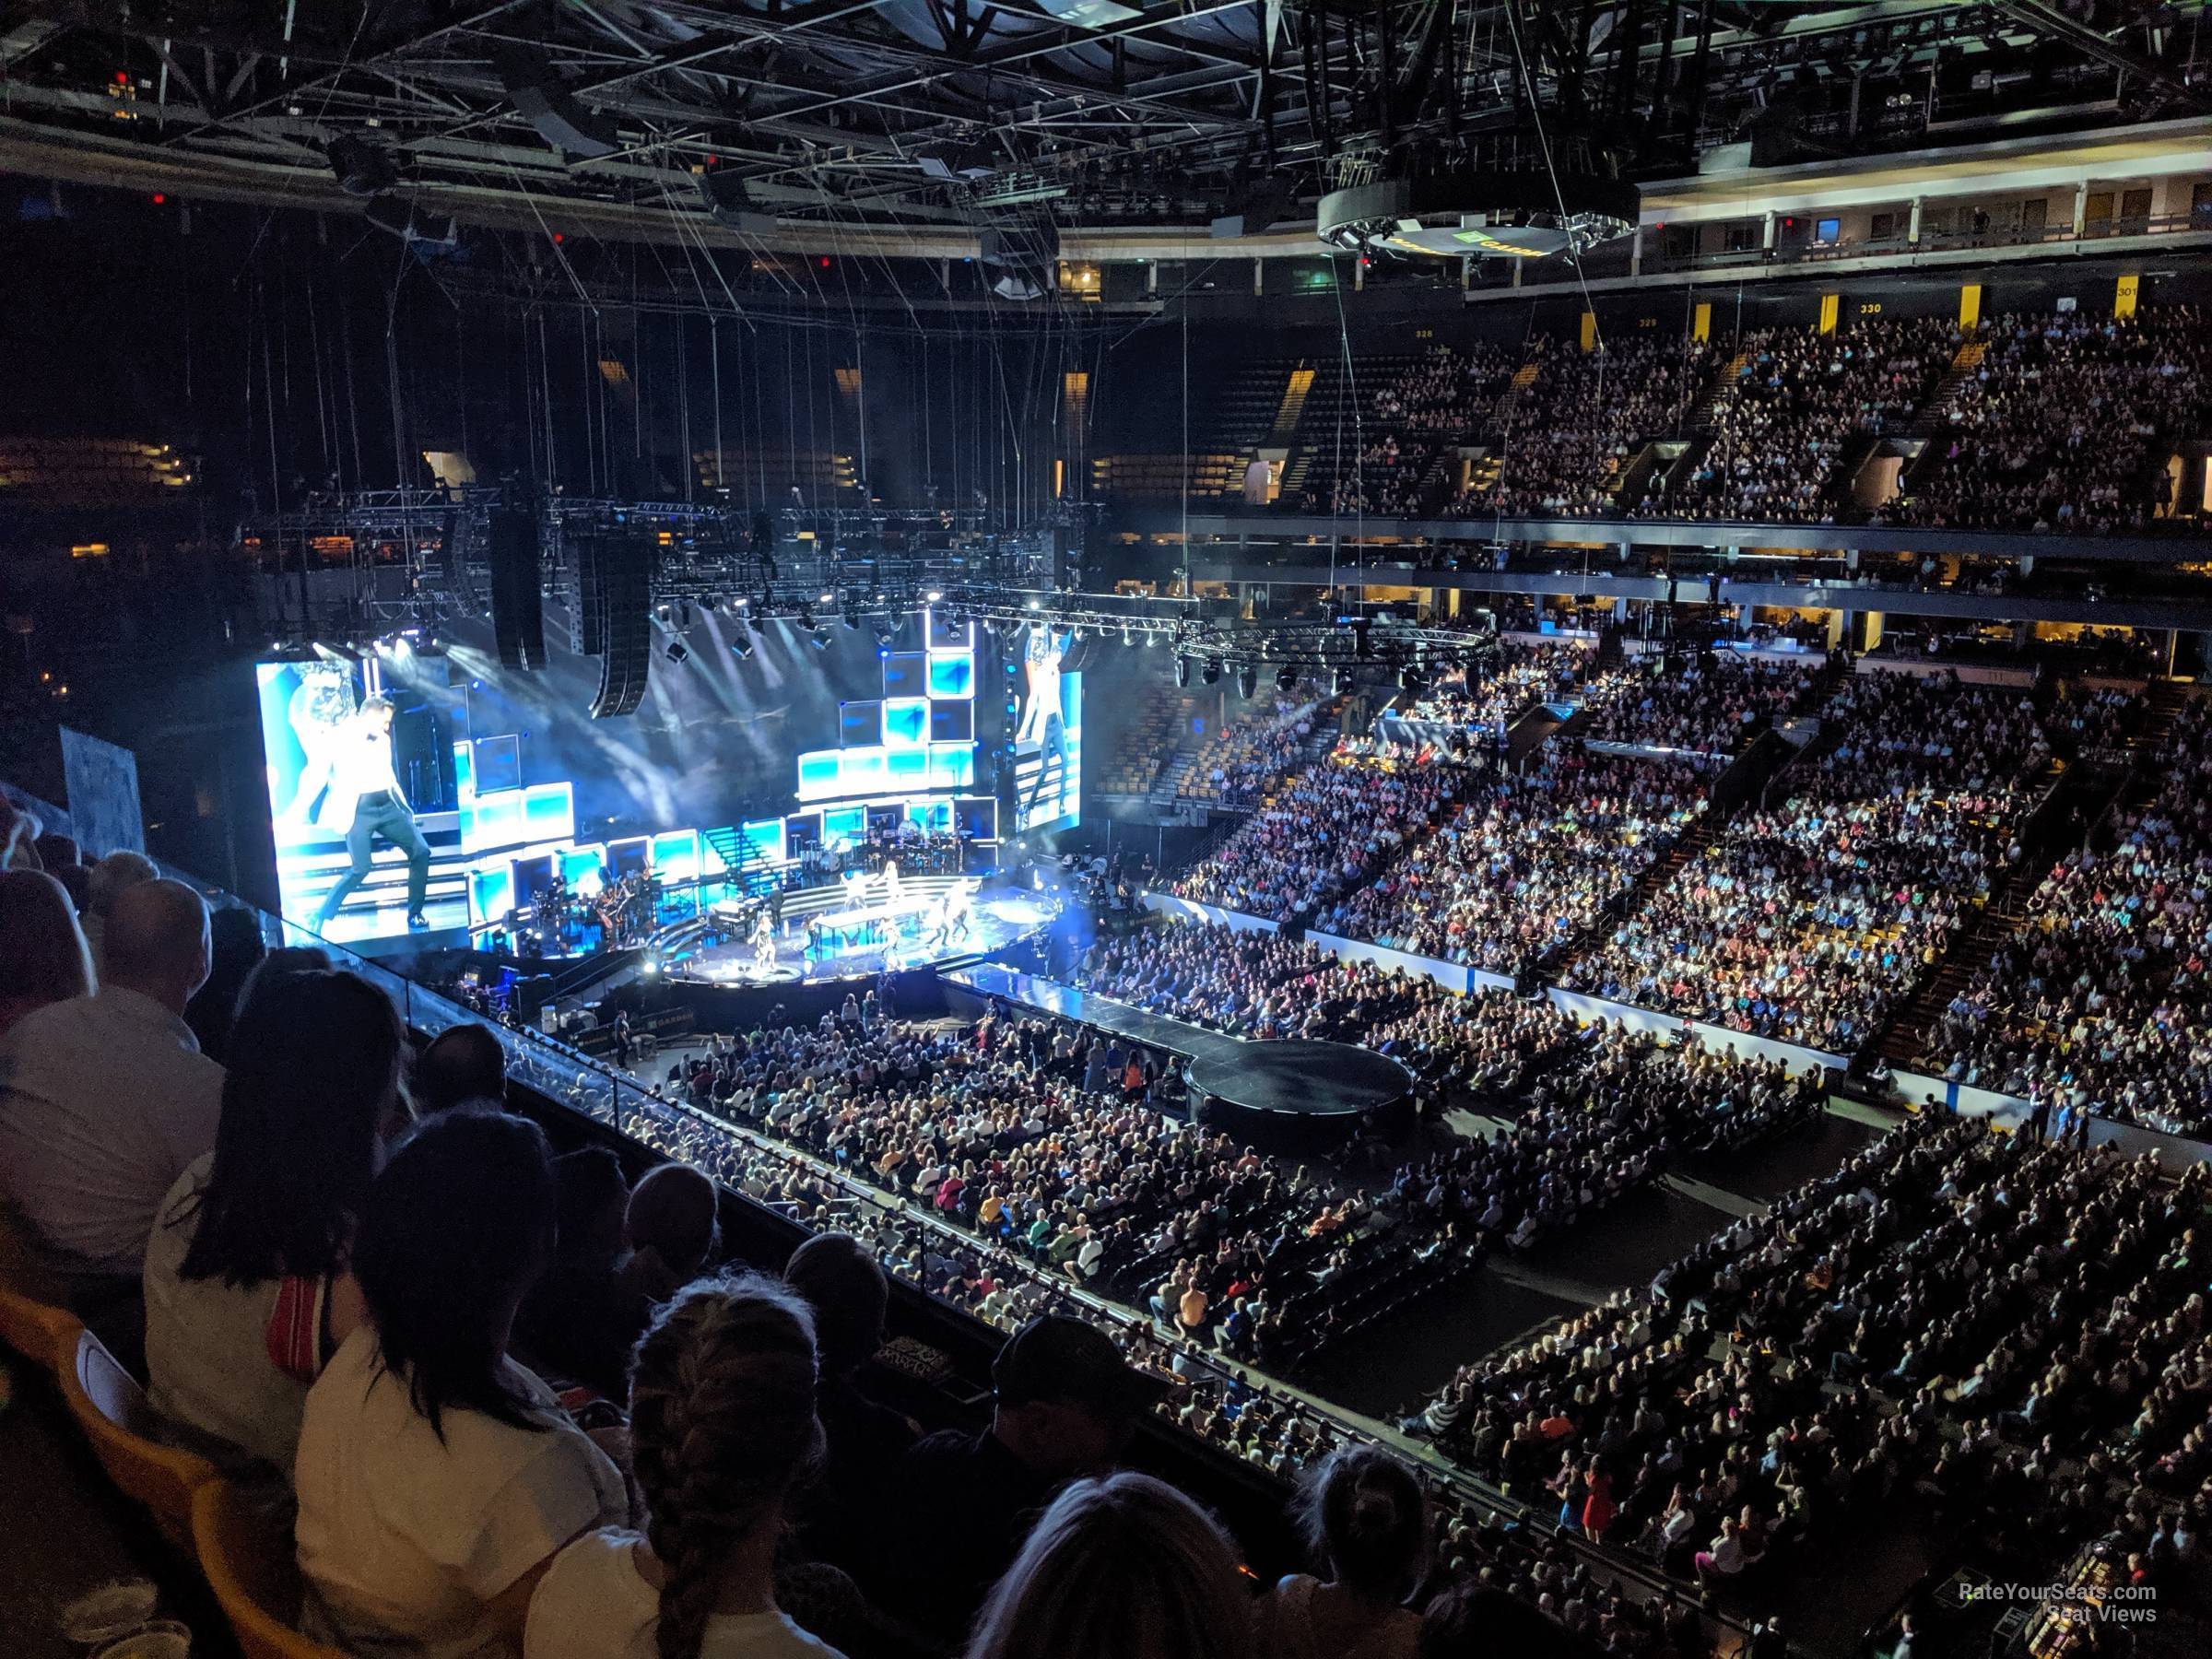 section 313, row 3 seat view  for concert - td garden